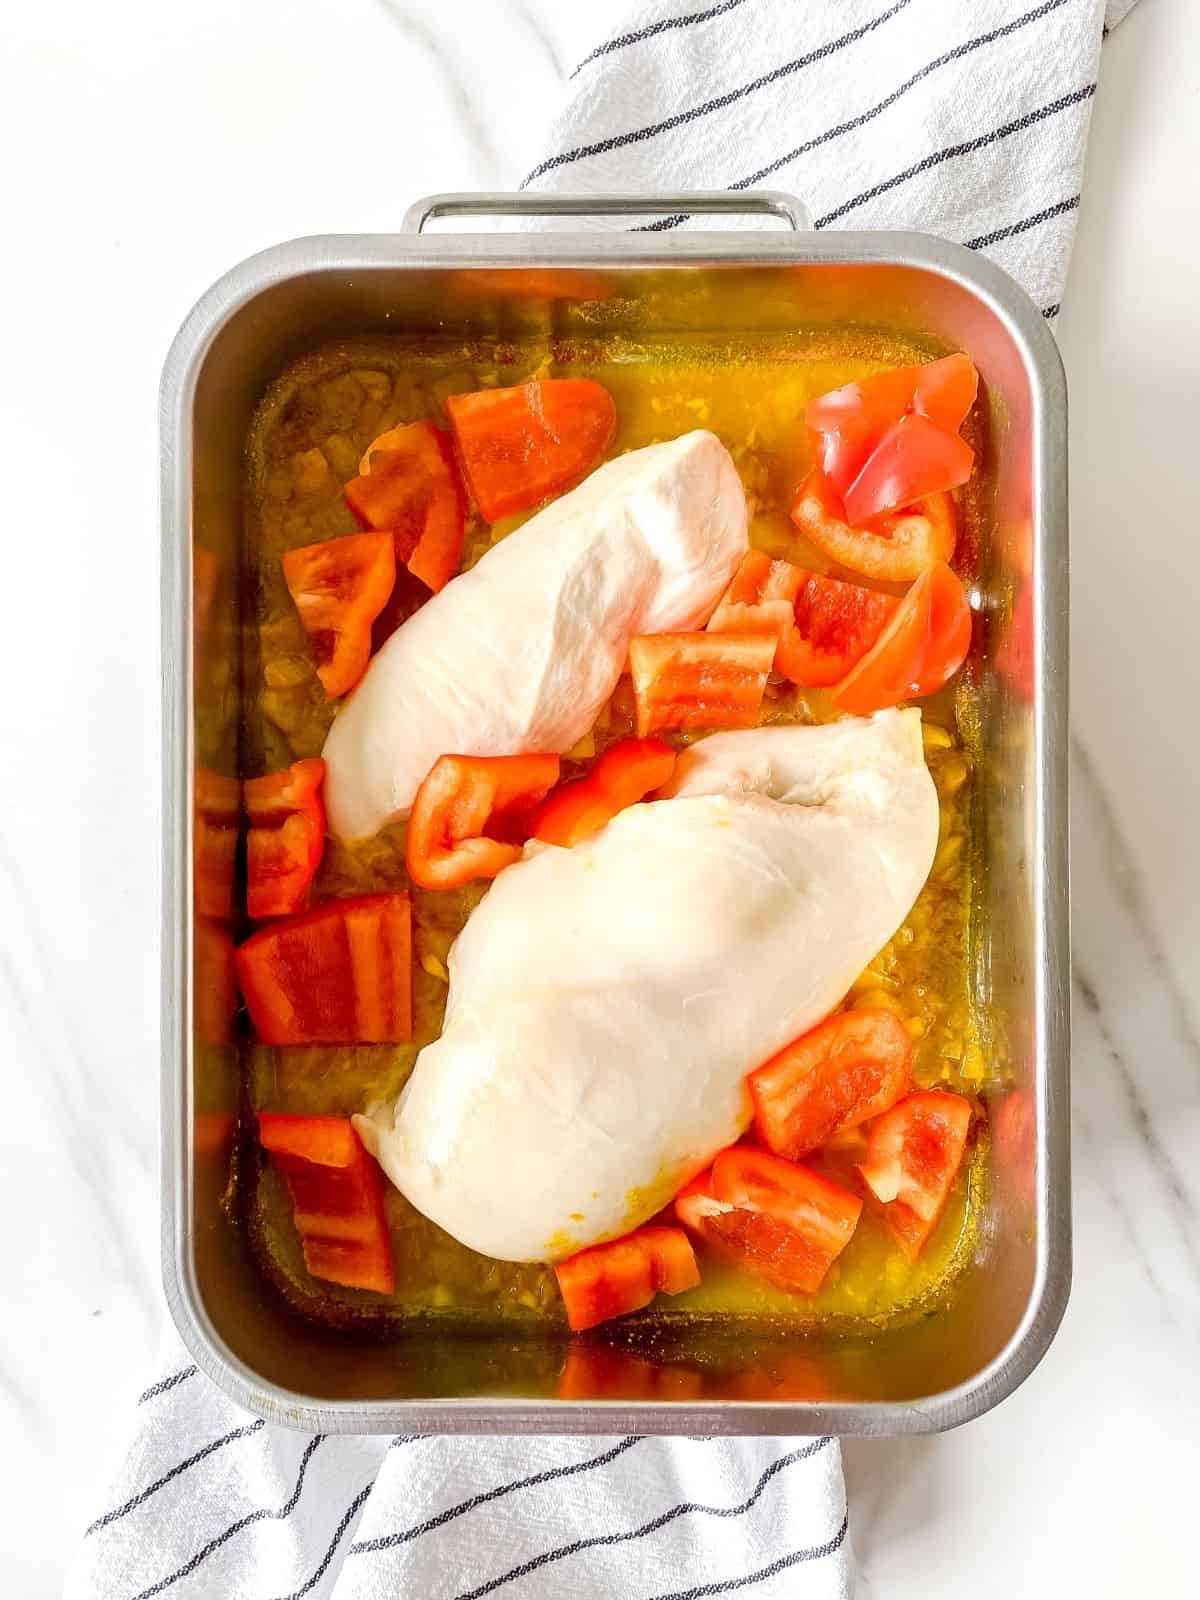 chicken thighs and red bell pepper in a metal dish.